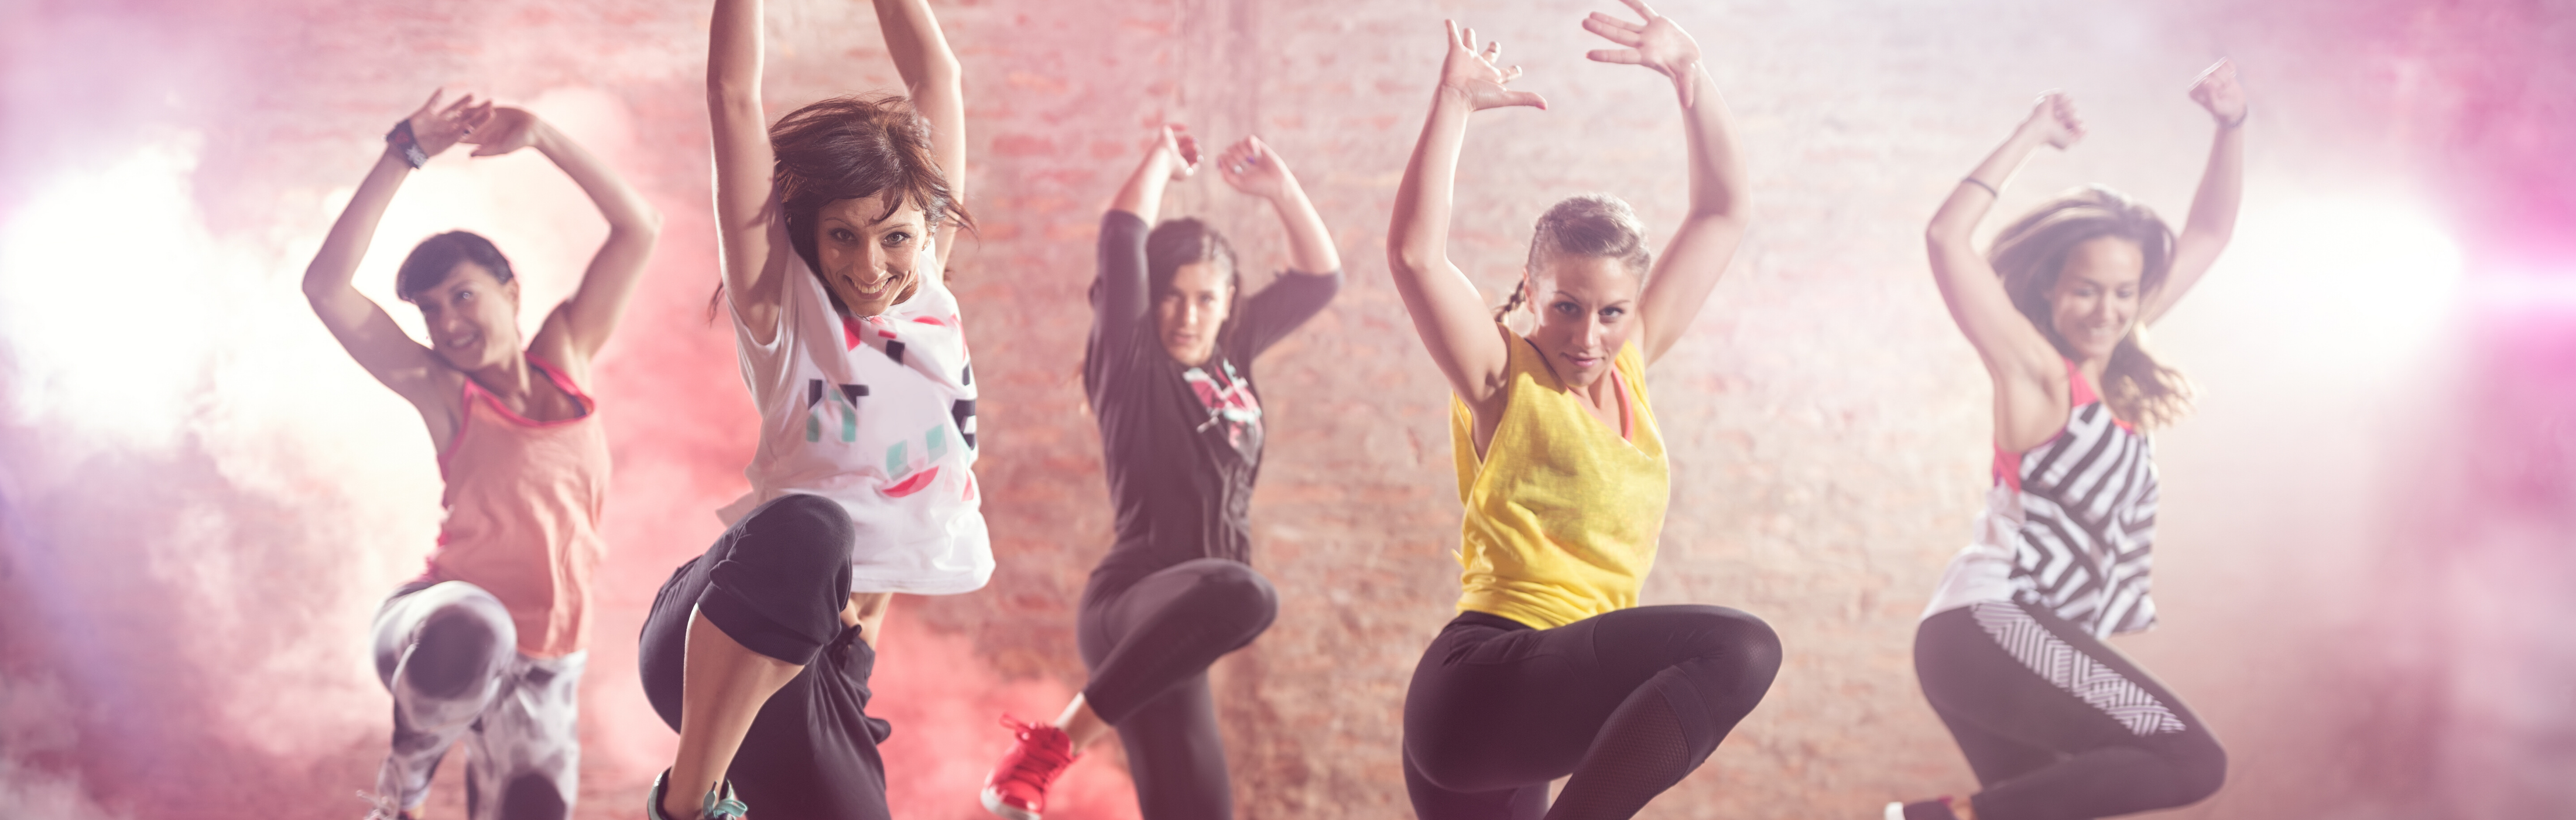 zumba, zumba fitness class, fitness class, zumba class near me, zumba exeter, exeter golf and country club